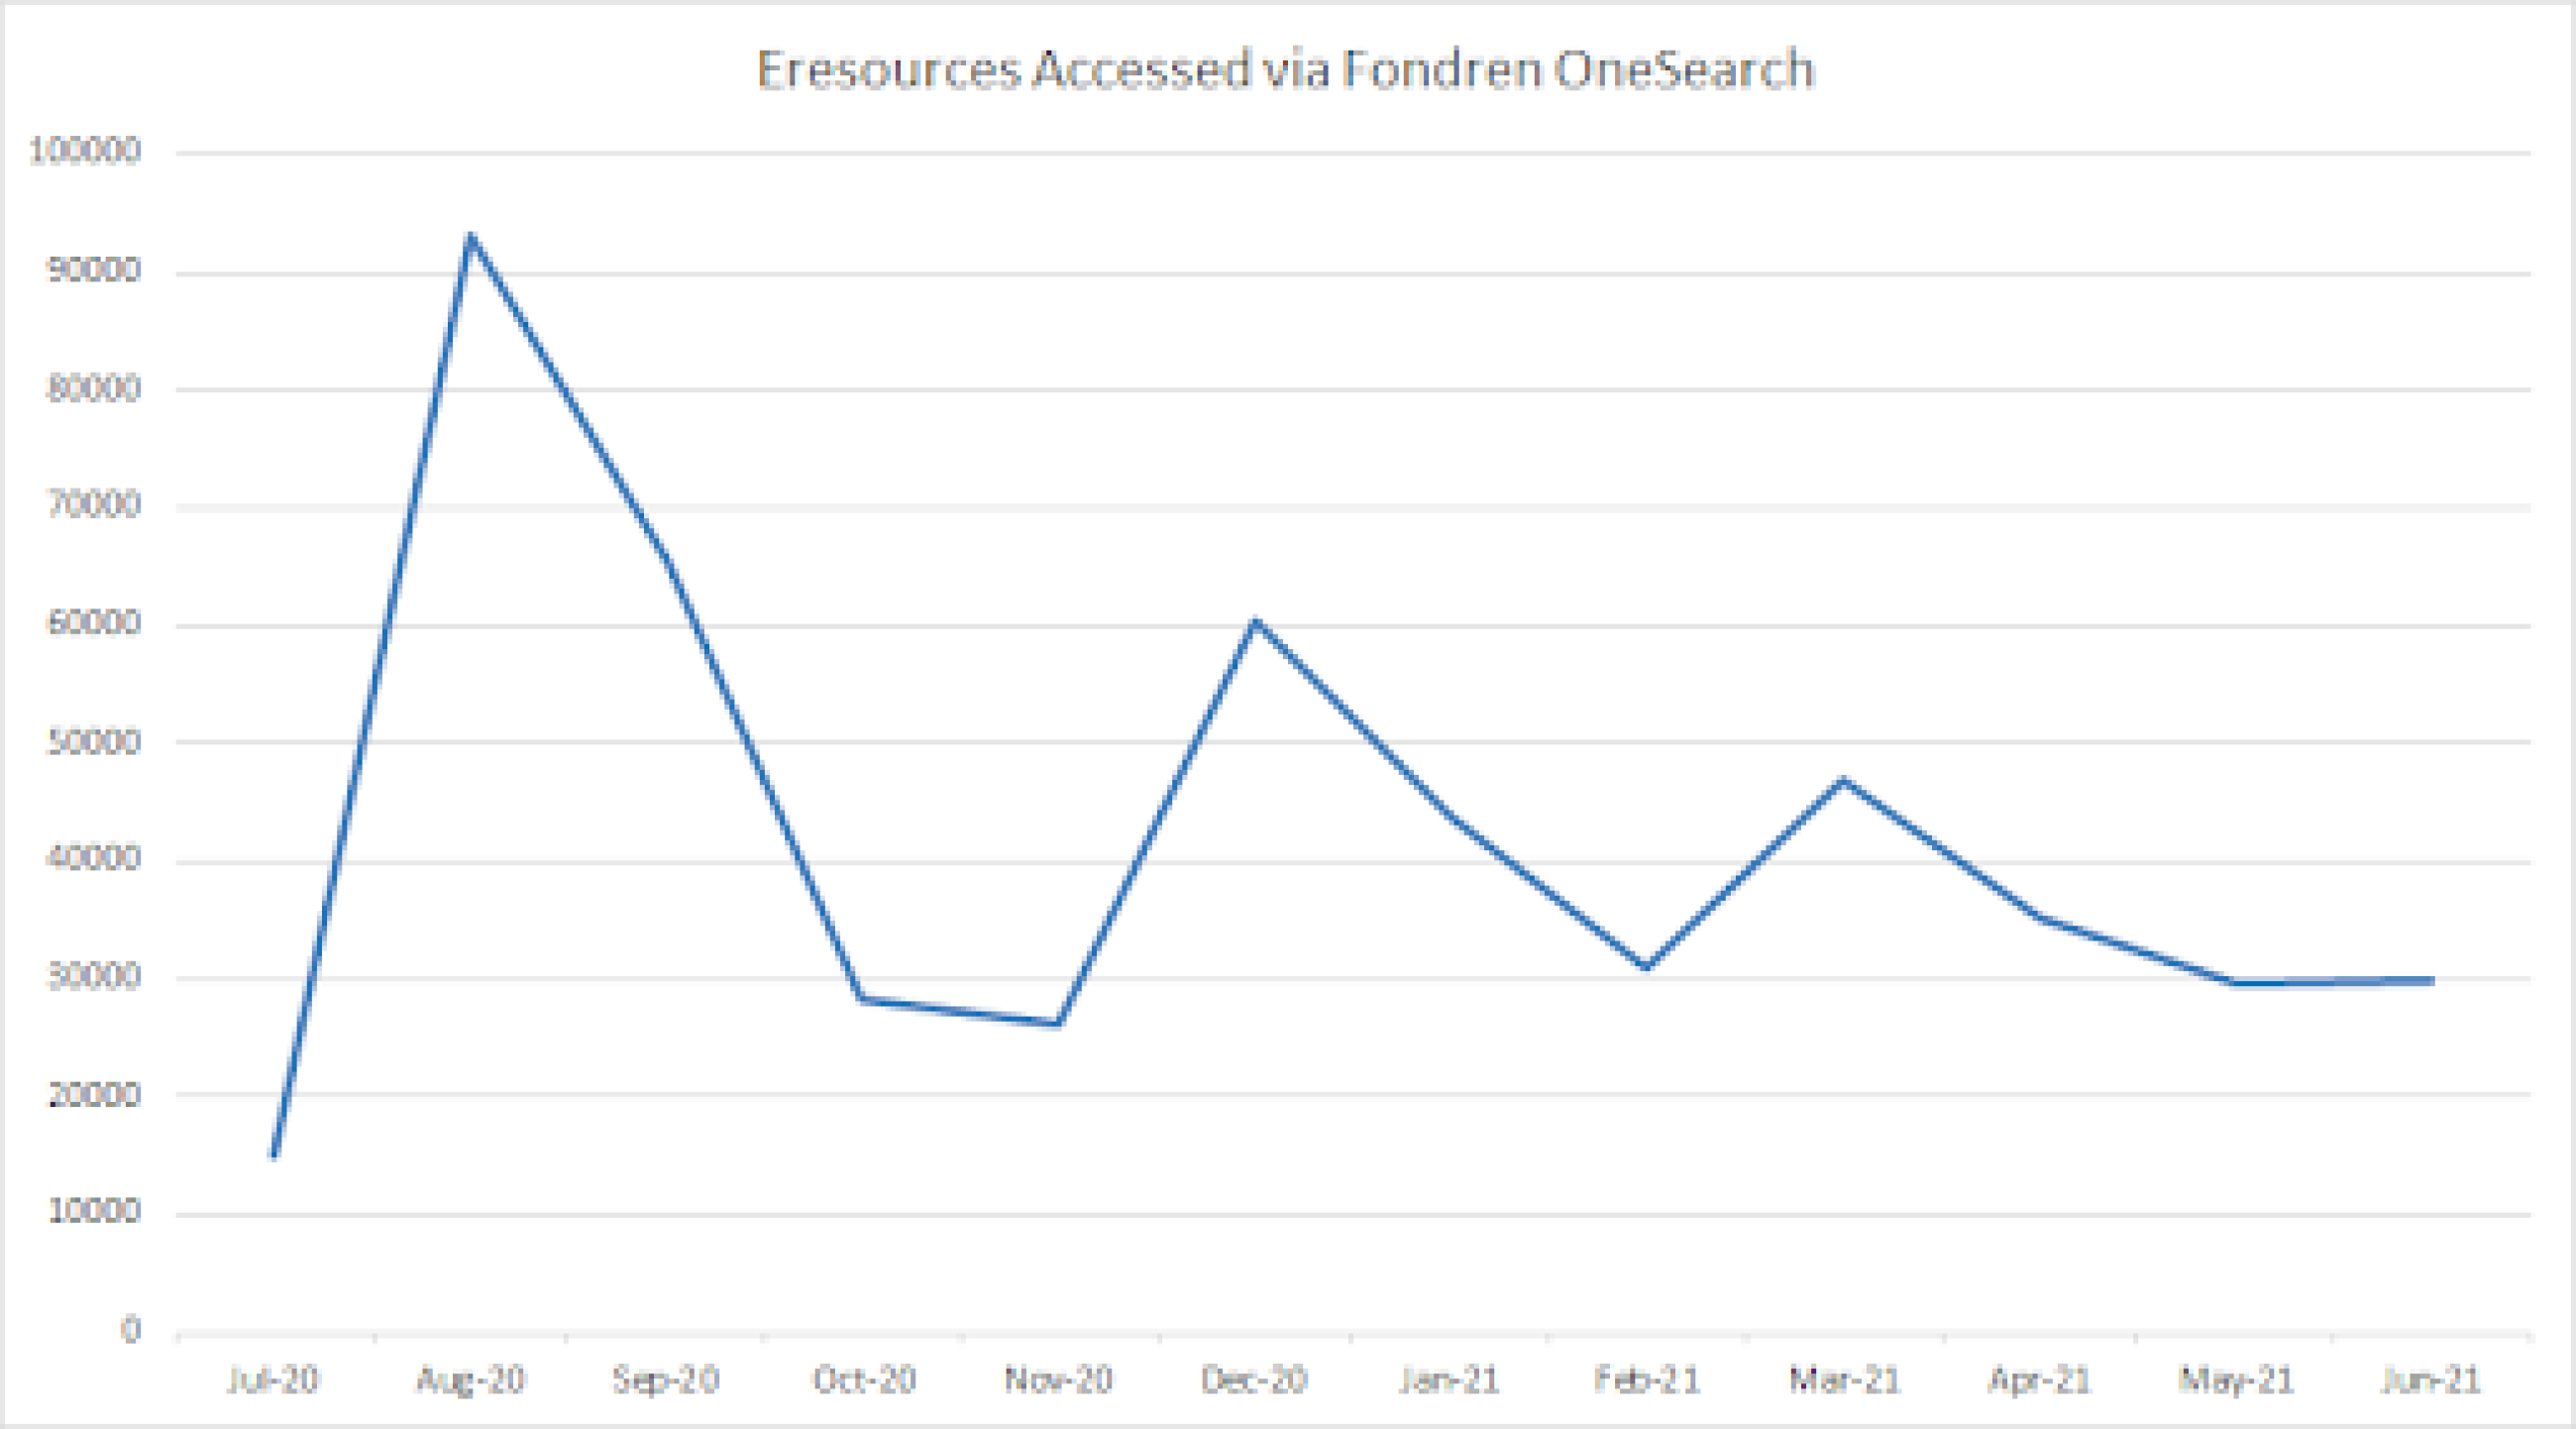 Chart of Fondren's use of Eresources Over 1 Year